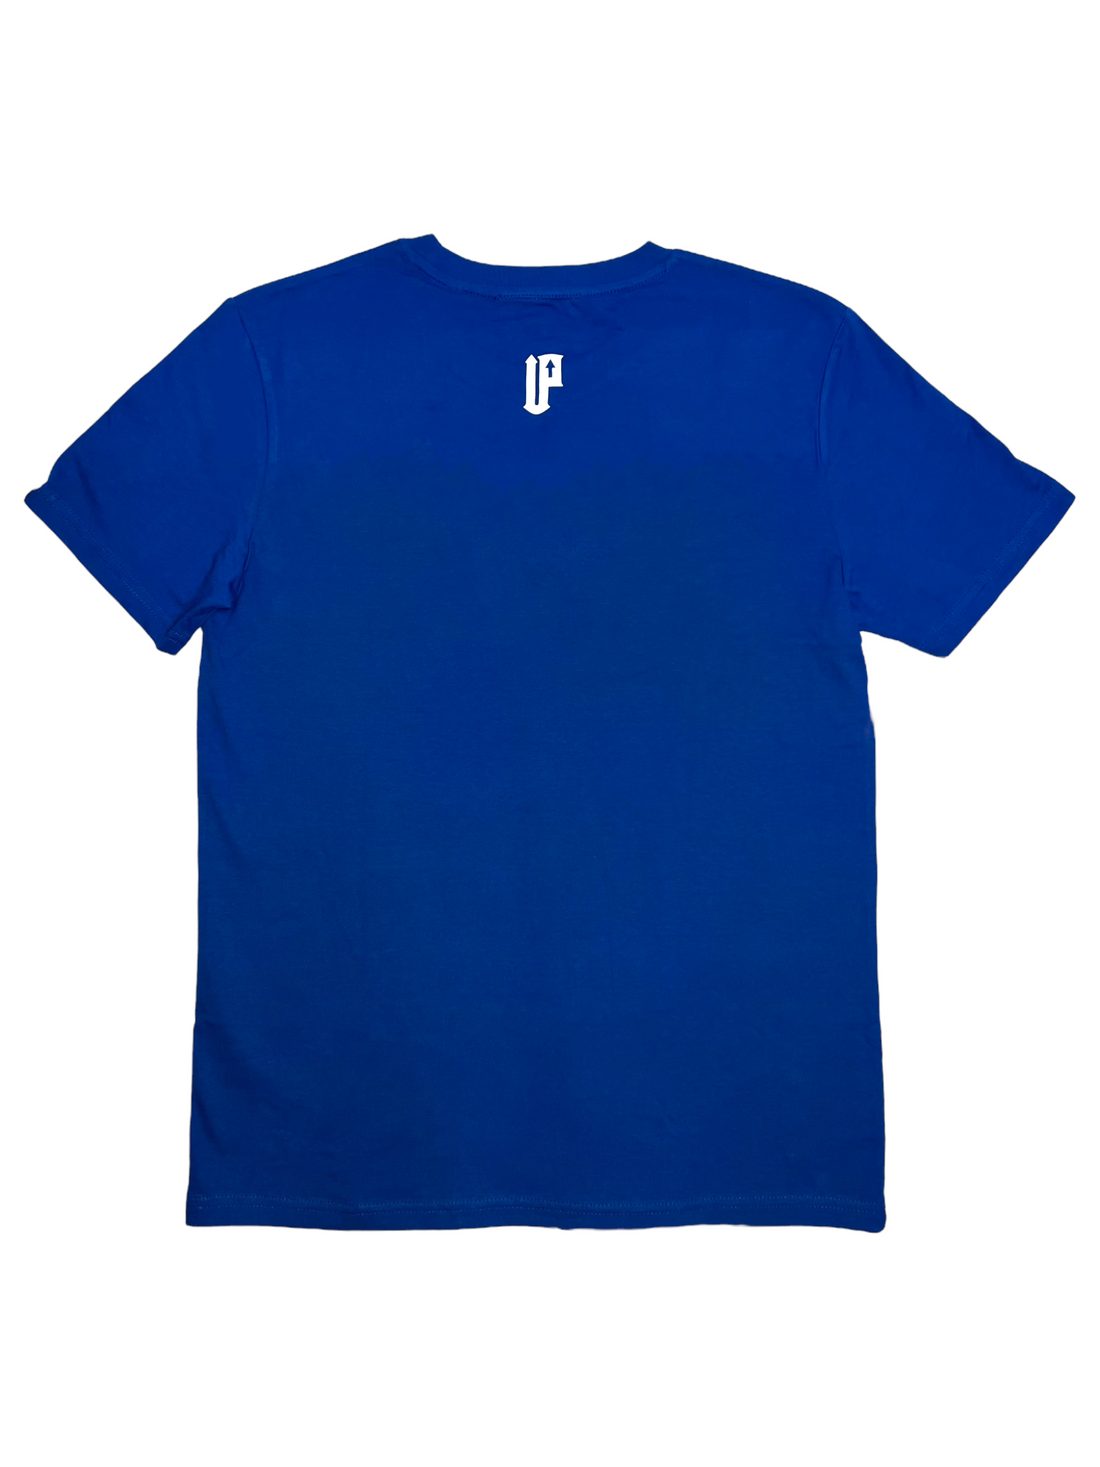 Double Up T-Shirt - Royal Blue/White